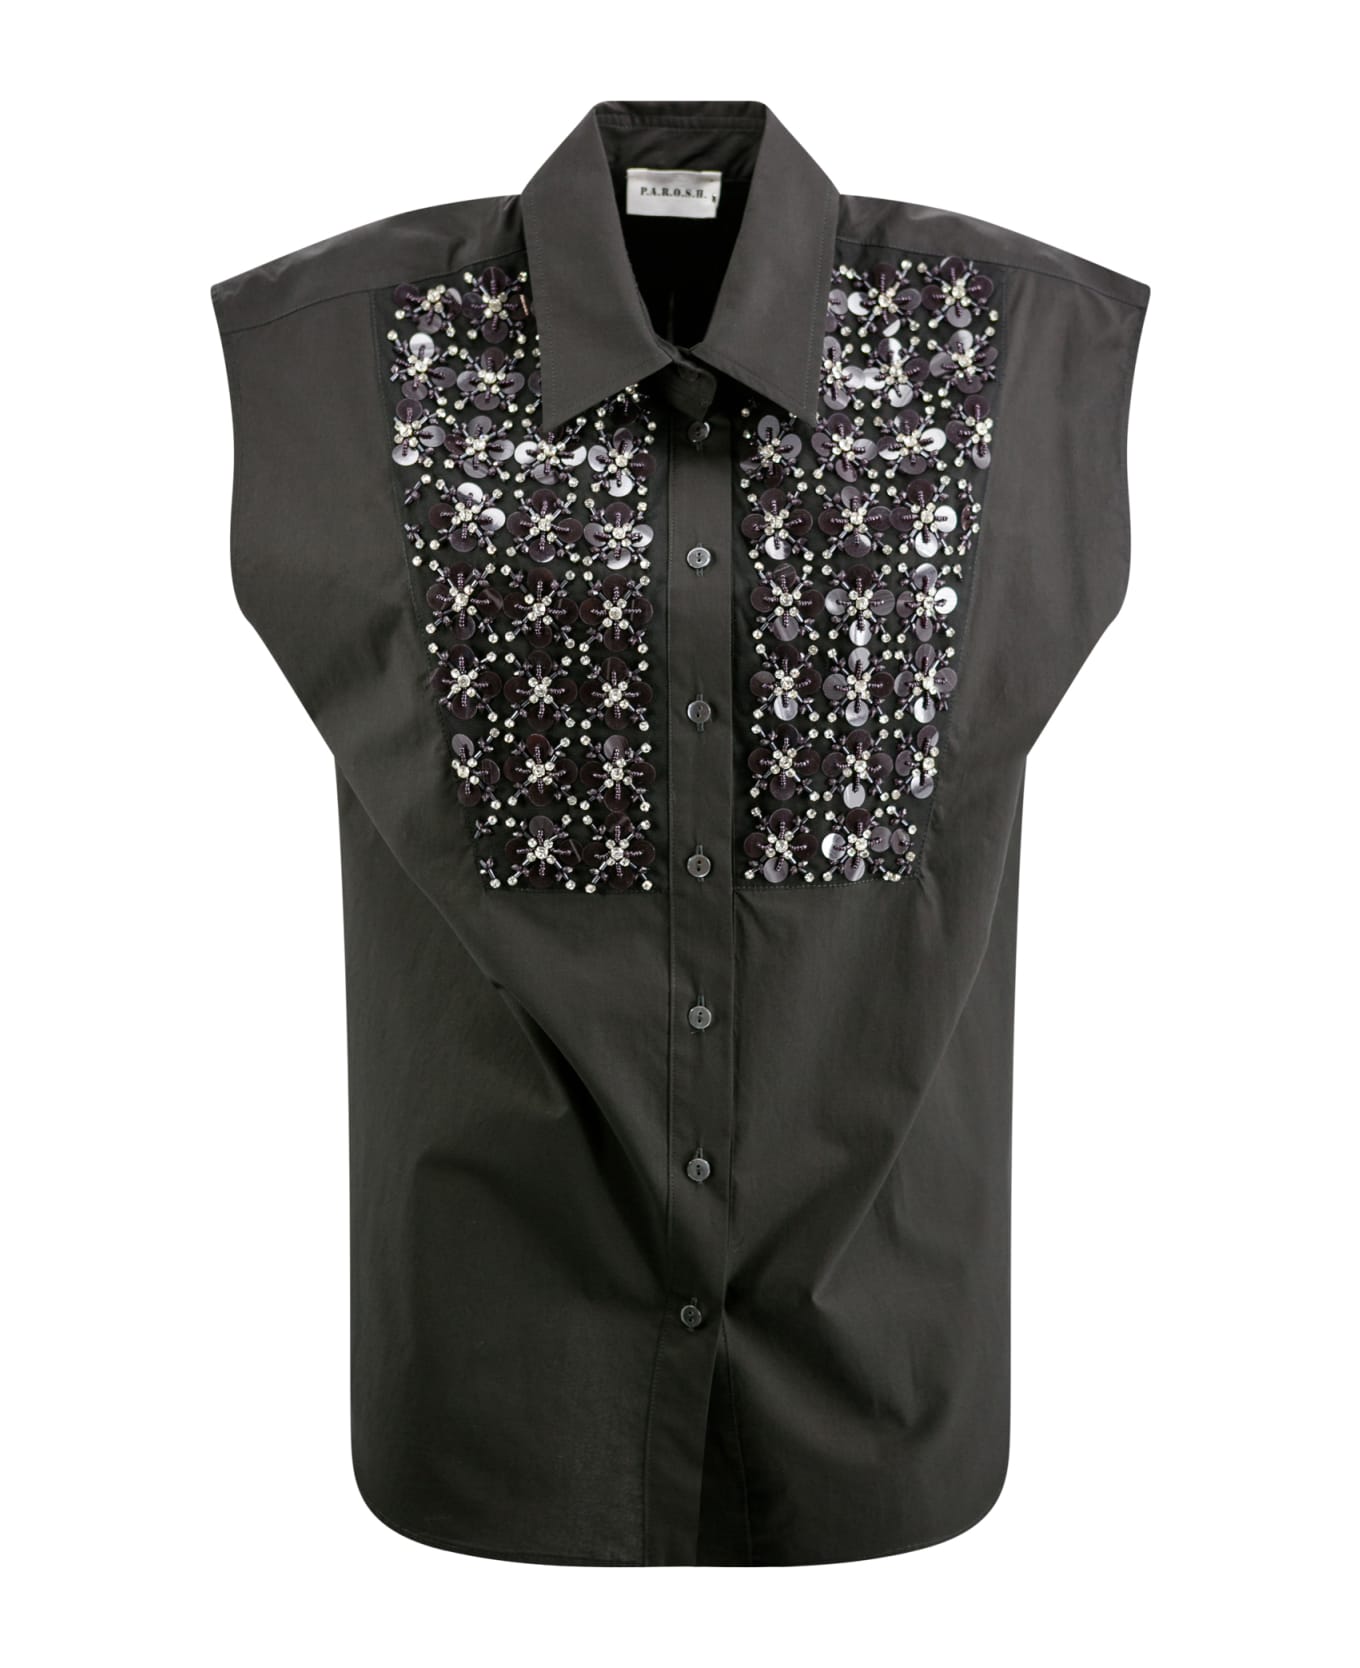 Parosh Shirt With Sequin Embroidery - Black